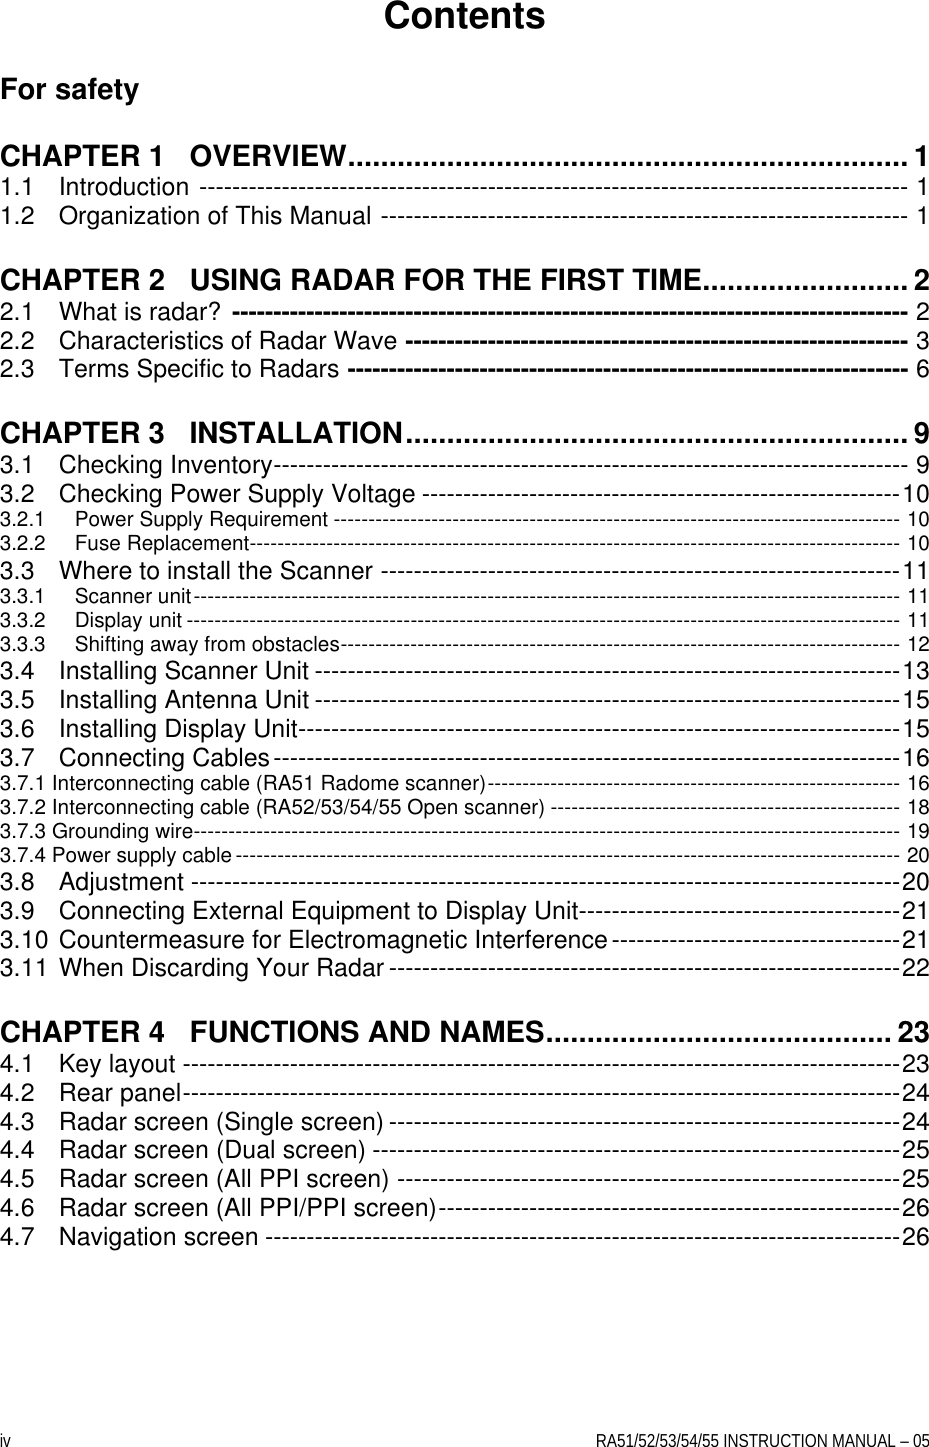 iv    RA51/52/53/54/55 INSTRUCTION MANUAL – 05 Contents  For safety  CHAPTER 1   OVERVIEW.................................................................... 1 1.1 Introduction -------------------------------------------------------------------------------------- 1 1.2 Organization of This Manual ---------------------------------------------------------------- 1  CHAPTER 2   USING RADAR FOR THE FIRST TIME......................... 2 2.1 What is radar? ---------------------------------------------------------------------------------- 2 2.2 Characteristics of Radar Wave ------------------------------------------------------------- 3 2.3 Terms Specific to Radars -------------------------------------------------------------------- 6  CHAPTER 3   INSTALLATION............................................................. 9 3.1 Checking Inventory----------------------------------------------------------------------------- 9 3.2 Checking Power Supply Voltage ----------------------------------------------------------10 3.2.1 Power Supply Requirement --------------------------------------------------------------------------------- 10 3.2.2 Fuse Replacement--------------------------------------------------------------------------------------------- 10 3.3 Where to install the Scanner ---------------------------------------------------------------11 3.3.1 Scanner unit----------------------------------------------------------------------------------------------------- 11 3.3.2 Display unit ------------------------------------------------------------------------------------------------------ 11 3.3.3 Shifting away from obstacles-------------------------------------------------------------------------------- 12 3.4 Installing Scanner Unit -----------------------------------------------------------------------13 3.5 Installing Antenna Unit -----------------------------------------------------------------------15 3.6 Installing Display Unit-------------------------------------------------------------------------15 3.7 Connecting Cables----------------------------------------------------------------------------16 3.7.1 Interconnecting cable (RA51 Radome scanner)----------------------------------------------------------- 16 3.7.2 Interconnecting cable (RA52/53/54/55 Open scanner) -------------------------------------------------- 18 3.7.3 Grounding wire----------------------------------------------------------------------------------------------------- 19 3.7.4 Power supply cable ----------------------------------------------------------------------------------------------- 20 3.8 Adjustment --------------------------------------------------------------------------------------20 3.9 Connecting External Equipment to Display Unit---------------------------------------21 3.10 Countermeasure for Electromagnetic Interference-----------------------------------21 3.11 When Discarding Your Radar --------------------------------------------------------------22  CHAPTER 4   FUNCTIONS AND NAMES.......................................... 23 4.1  Key layout ---------------------------------------------------------------------------------------23 4.2  Rear panel---------------------------------------------------------------------------------------24 4.3  Radar screen (Single screen) --------------------------------------------------------------24 4.4  Radar screen (Dual screen) ----------------------------------------------------------------25 4.5  Radar screen (All PPI screen) -------------------------------------------------------------25 4.6  Radar screen (All PPI/PPI screen)--------------------------------------------------------26 4.7  Navigation screen -----------------------------------------------------------------------------26  